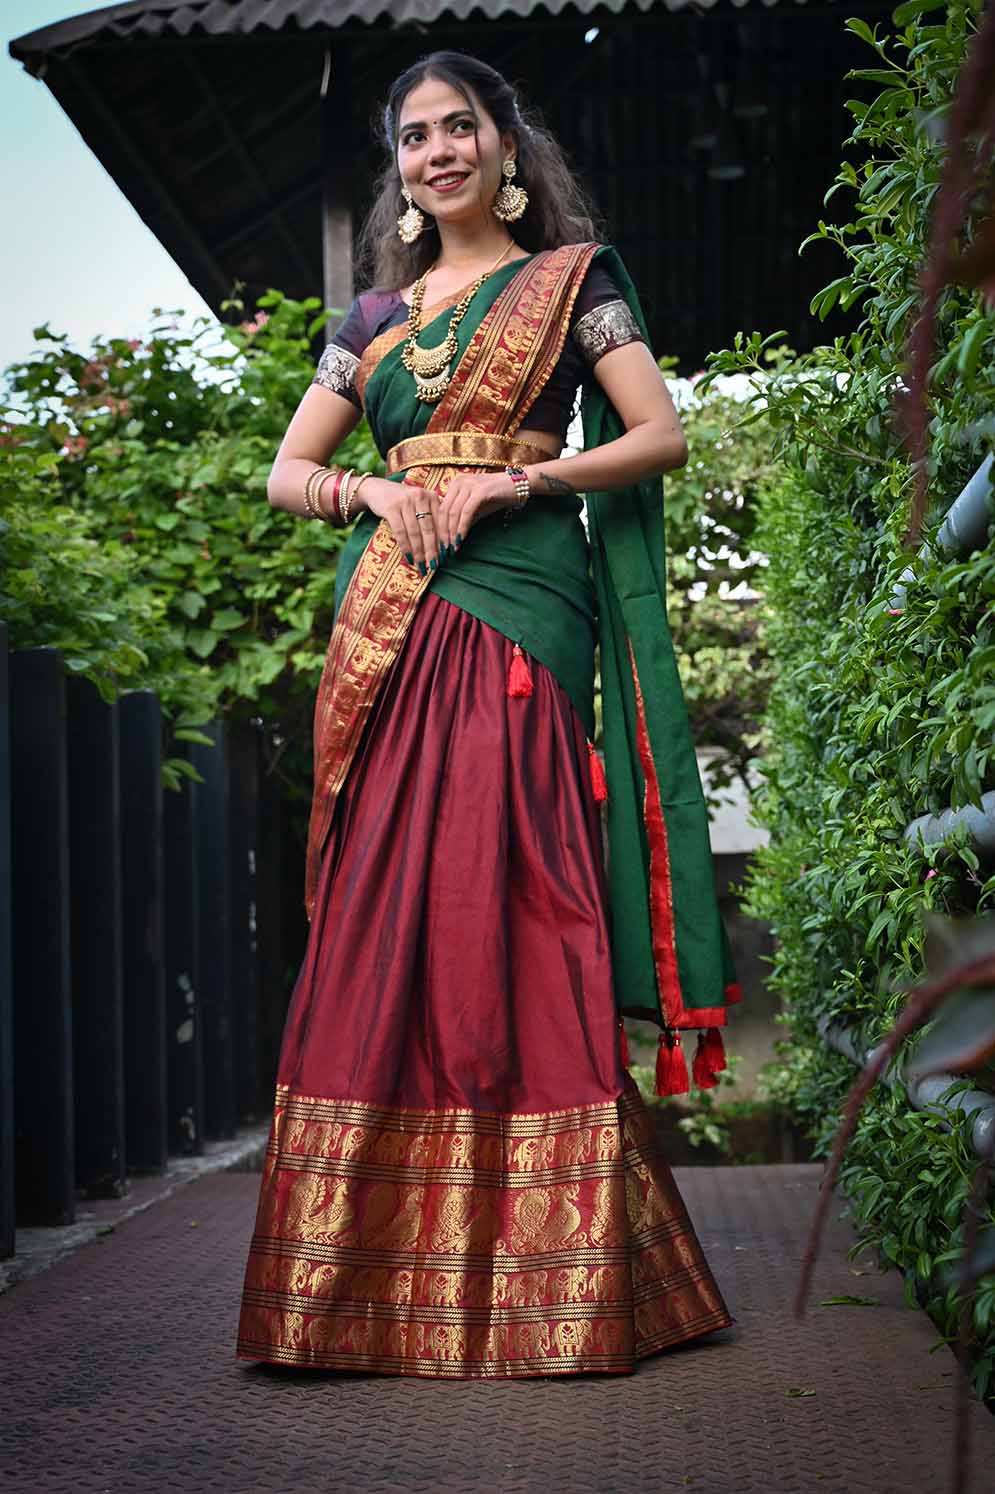 Wondering How to Wear Lehenga Saree? Hint: It's All About the Drape!